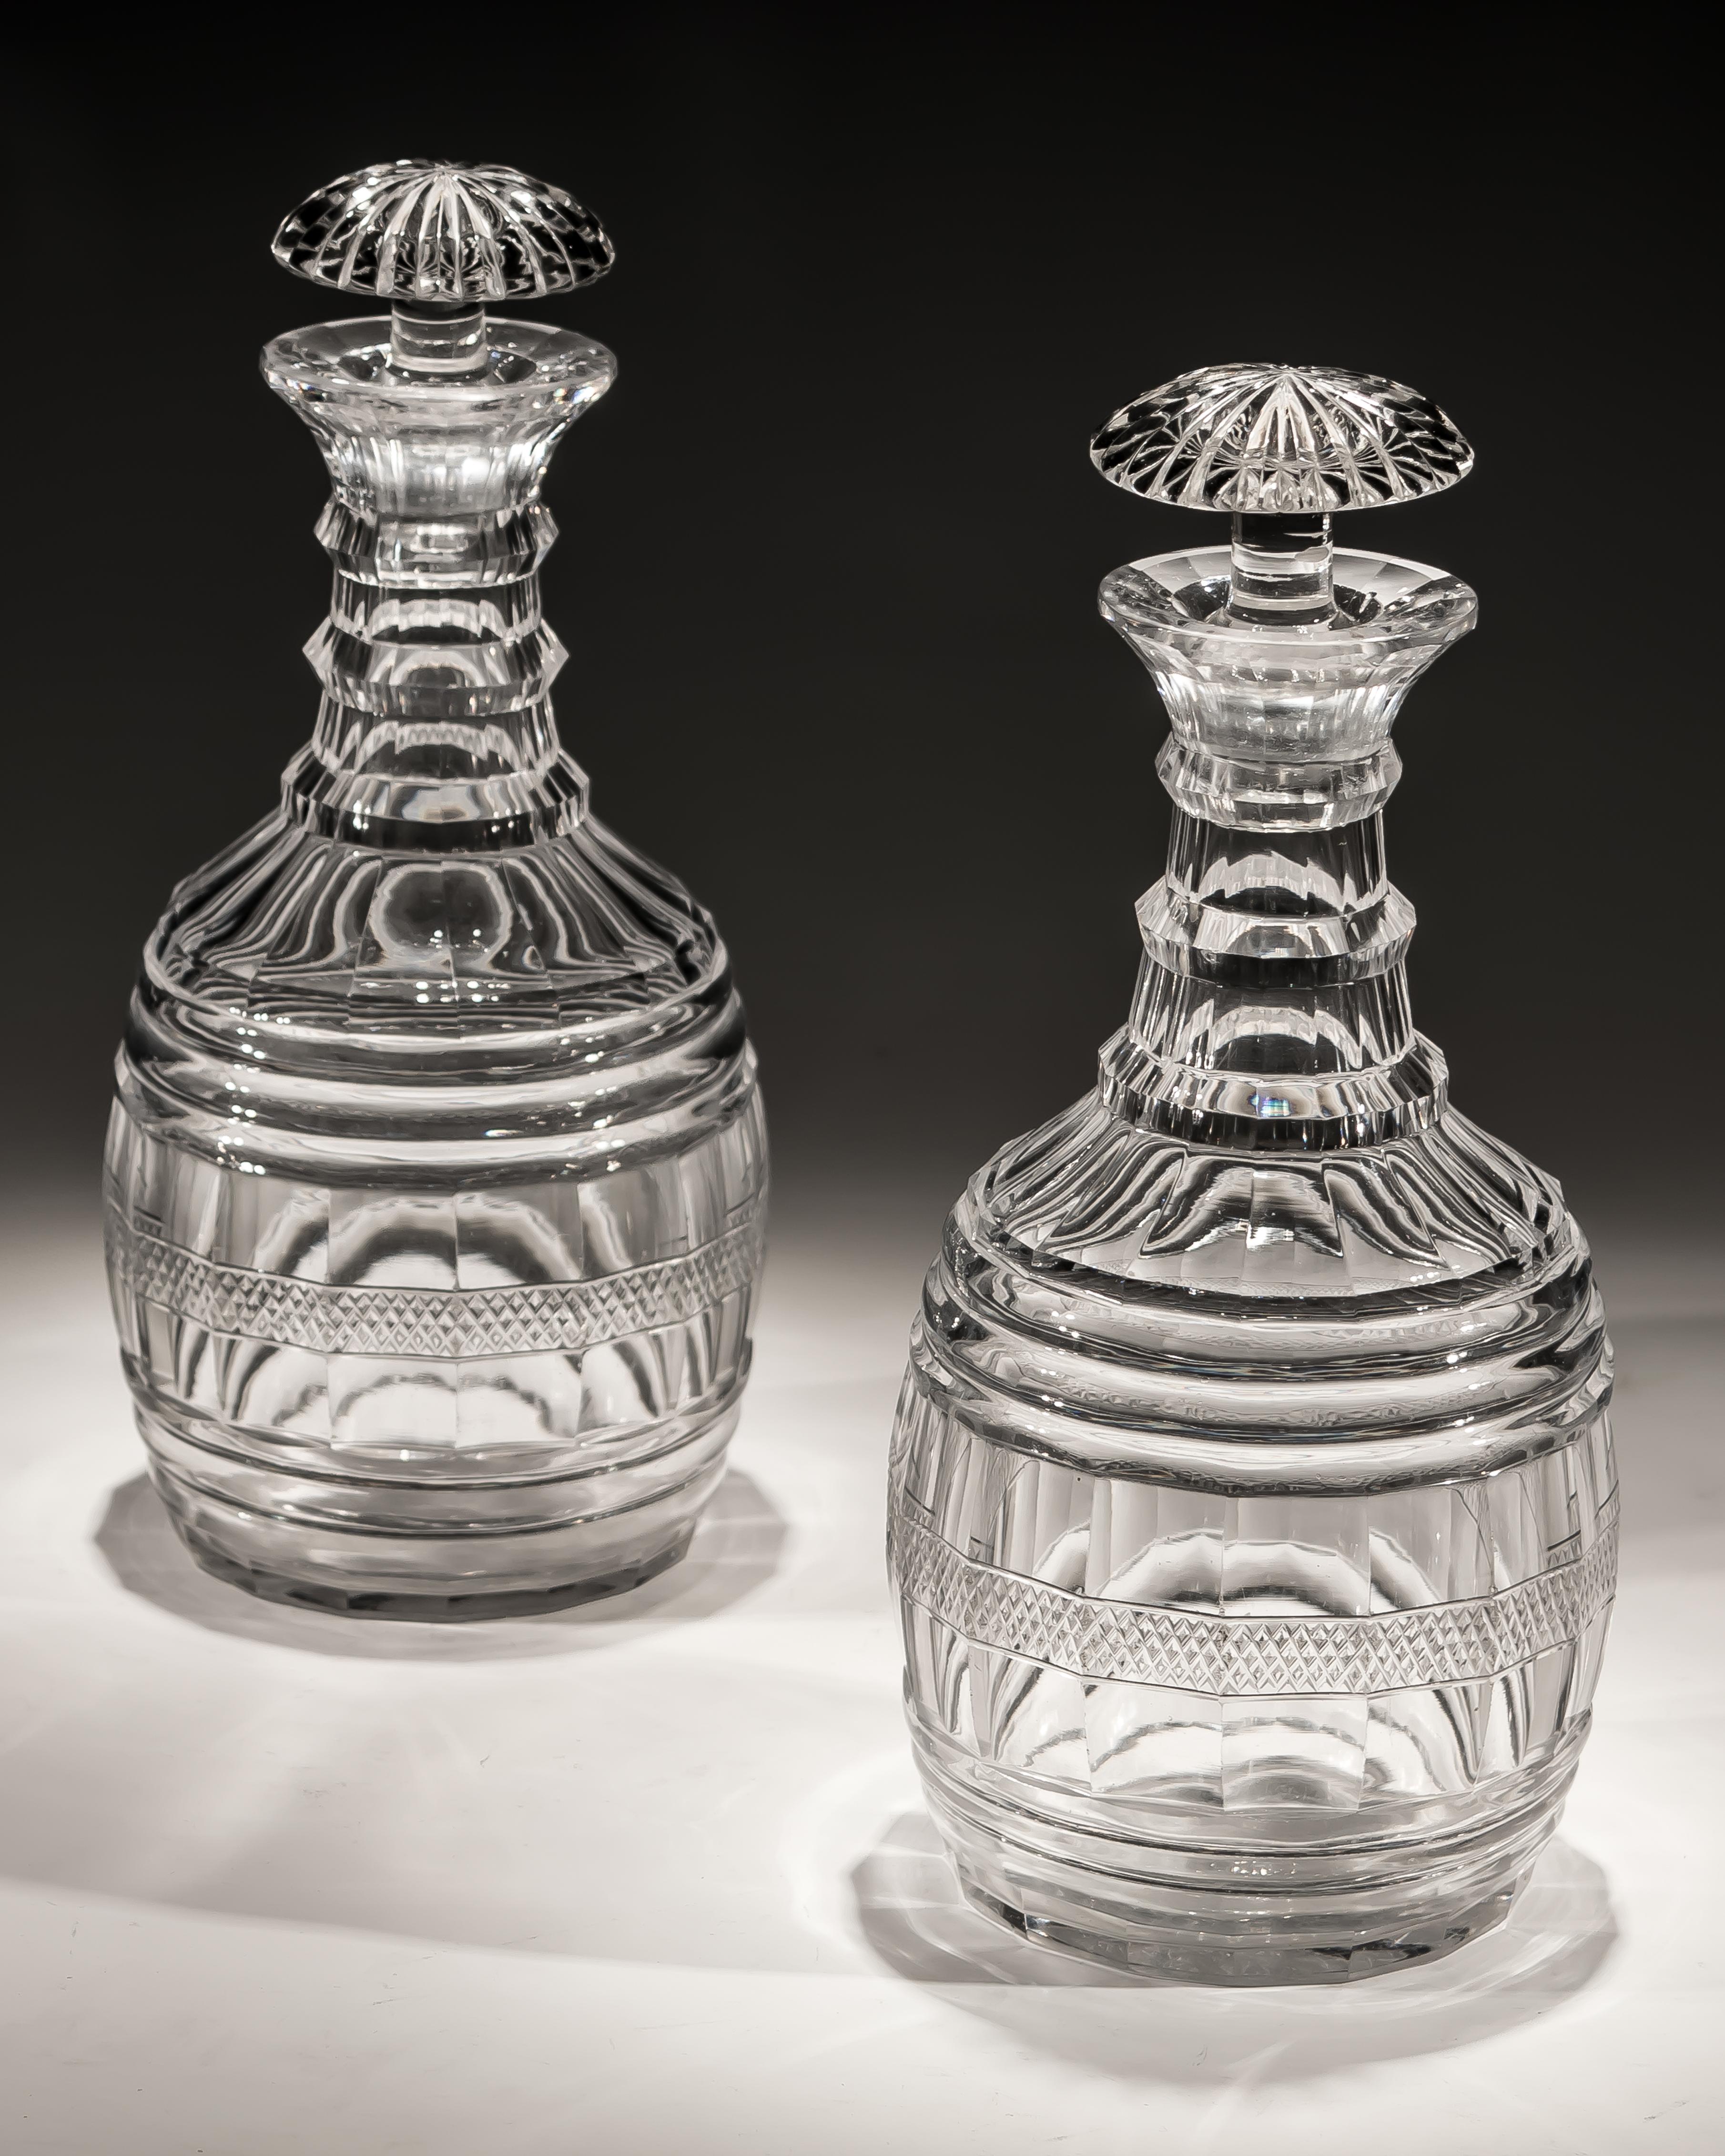 Pair of Regency Cut Glass Barrel Decanters In Good Condition For Sale In Steyning, West sussex